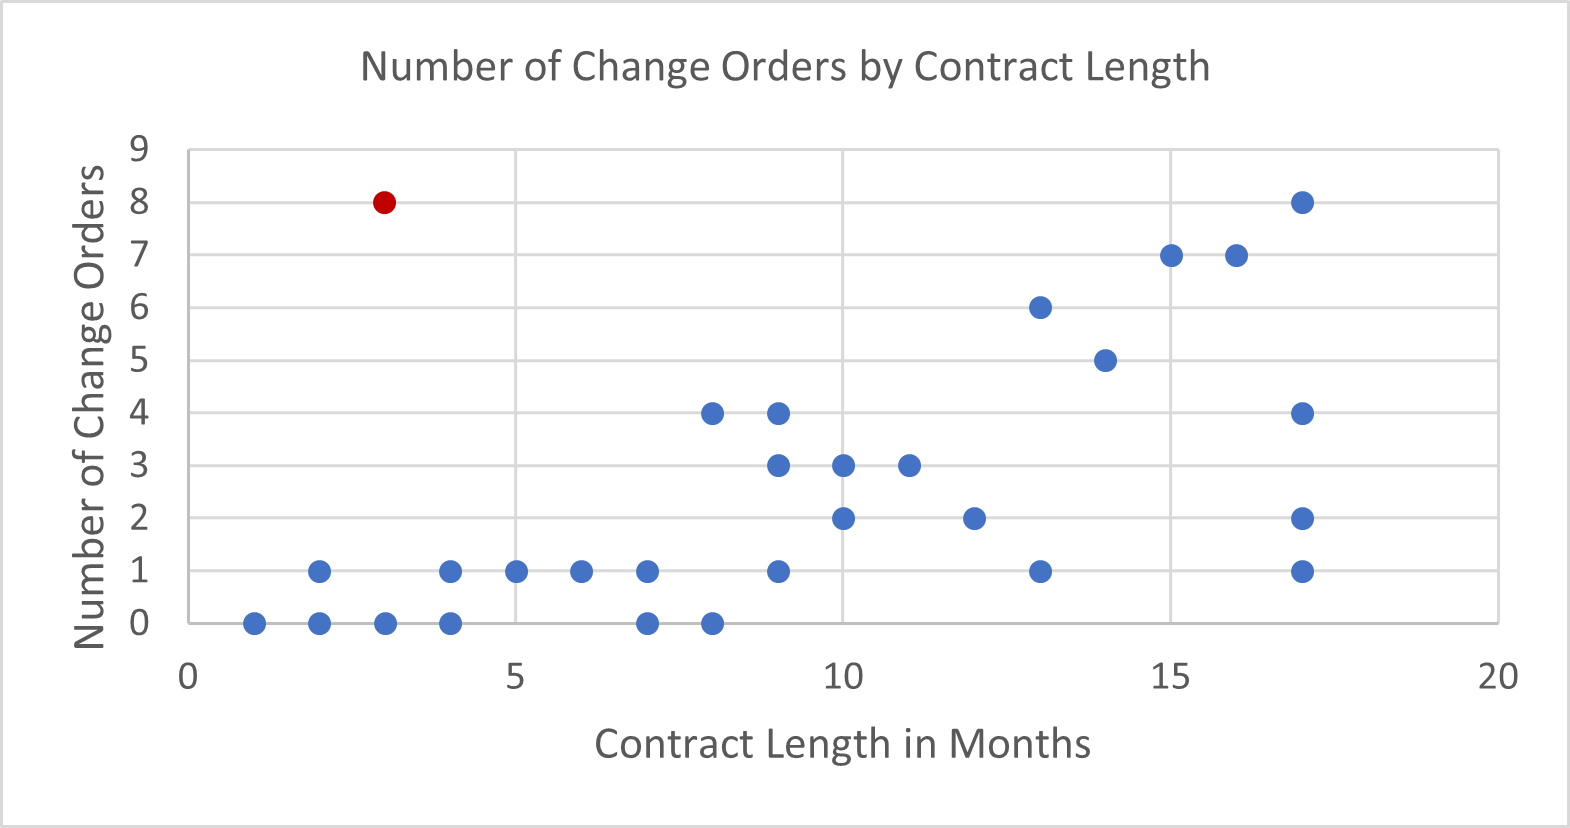 Scatter Plot entitled “Number of Change Orders by Contract Length”. Each of the 29 points on the scatter plot represents one contract over an 18 month period. The metrics plotted show the number of change orders from 0-8 (Y axis) per contract length in months (X axis). There is a correlation between the number of change orders and the contract length.  One contract shows a large number of change orders (8) when compared to the short length of the contract (3 months) and is an outlier.